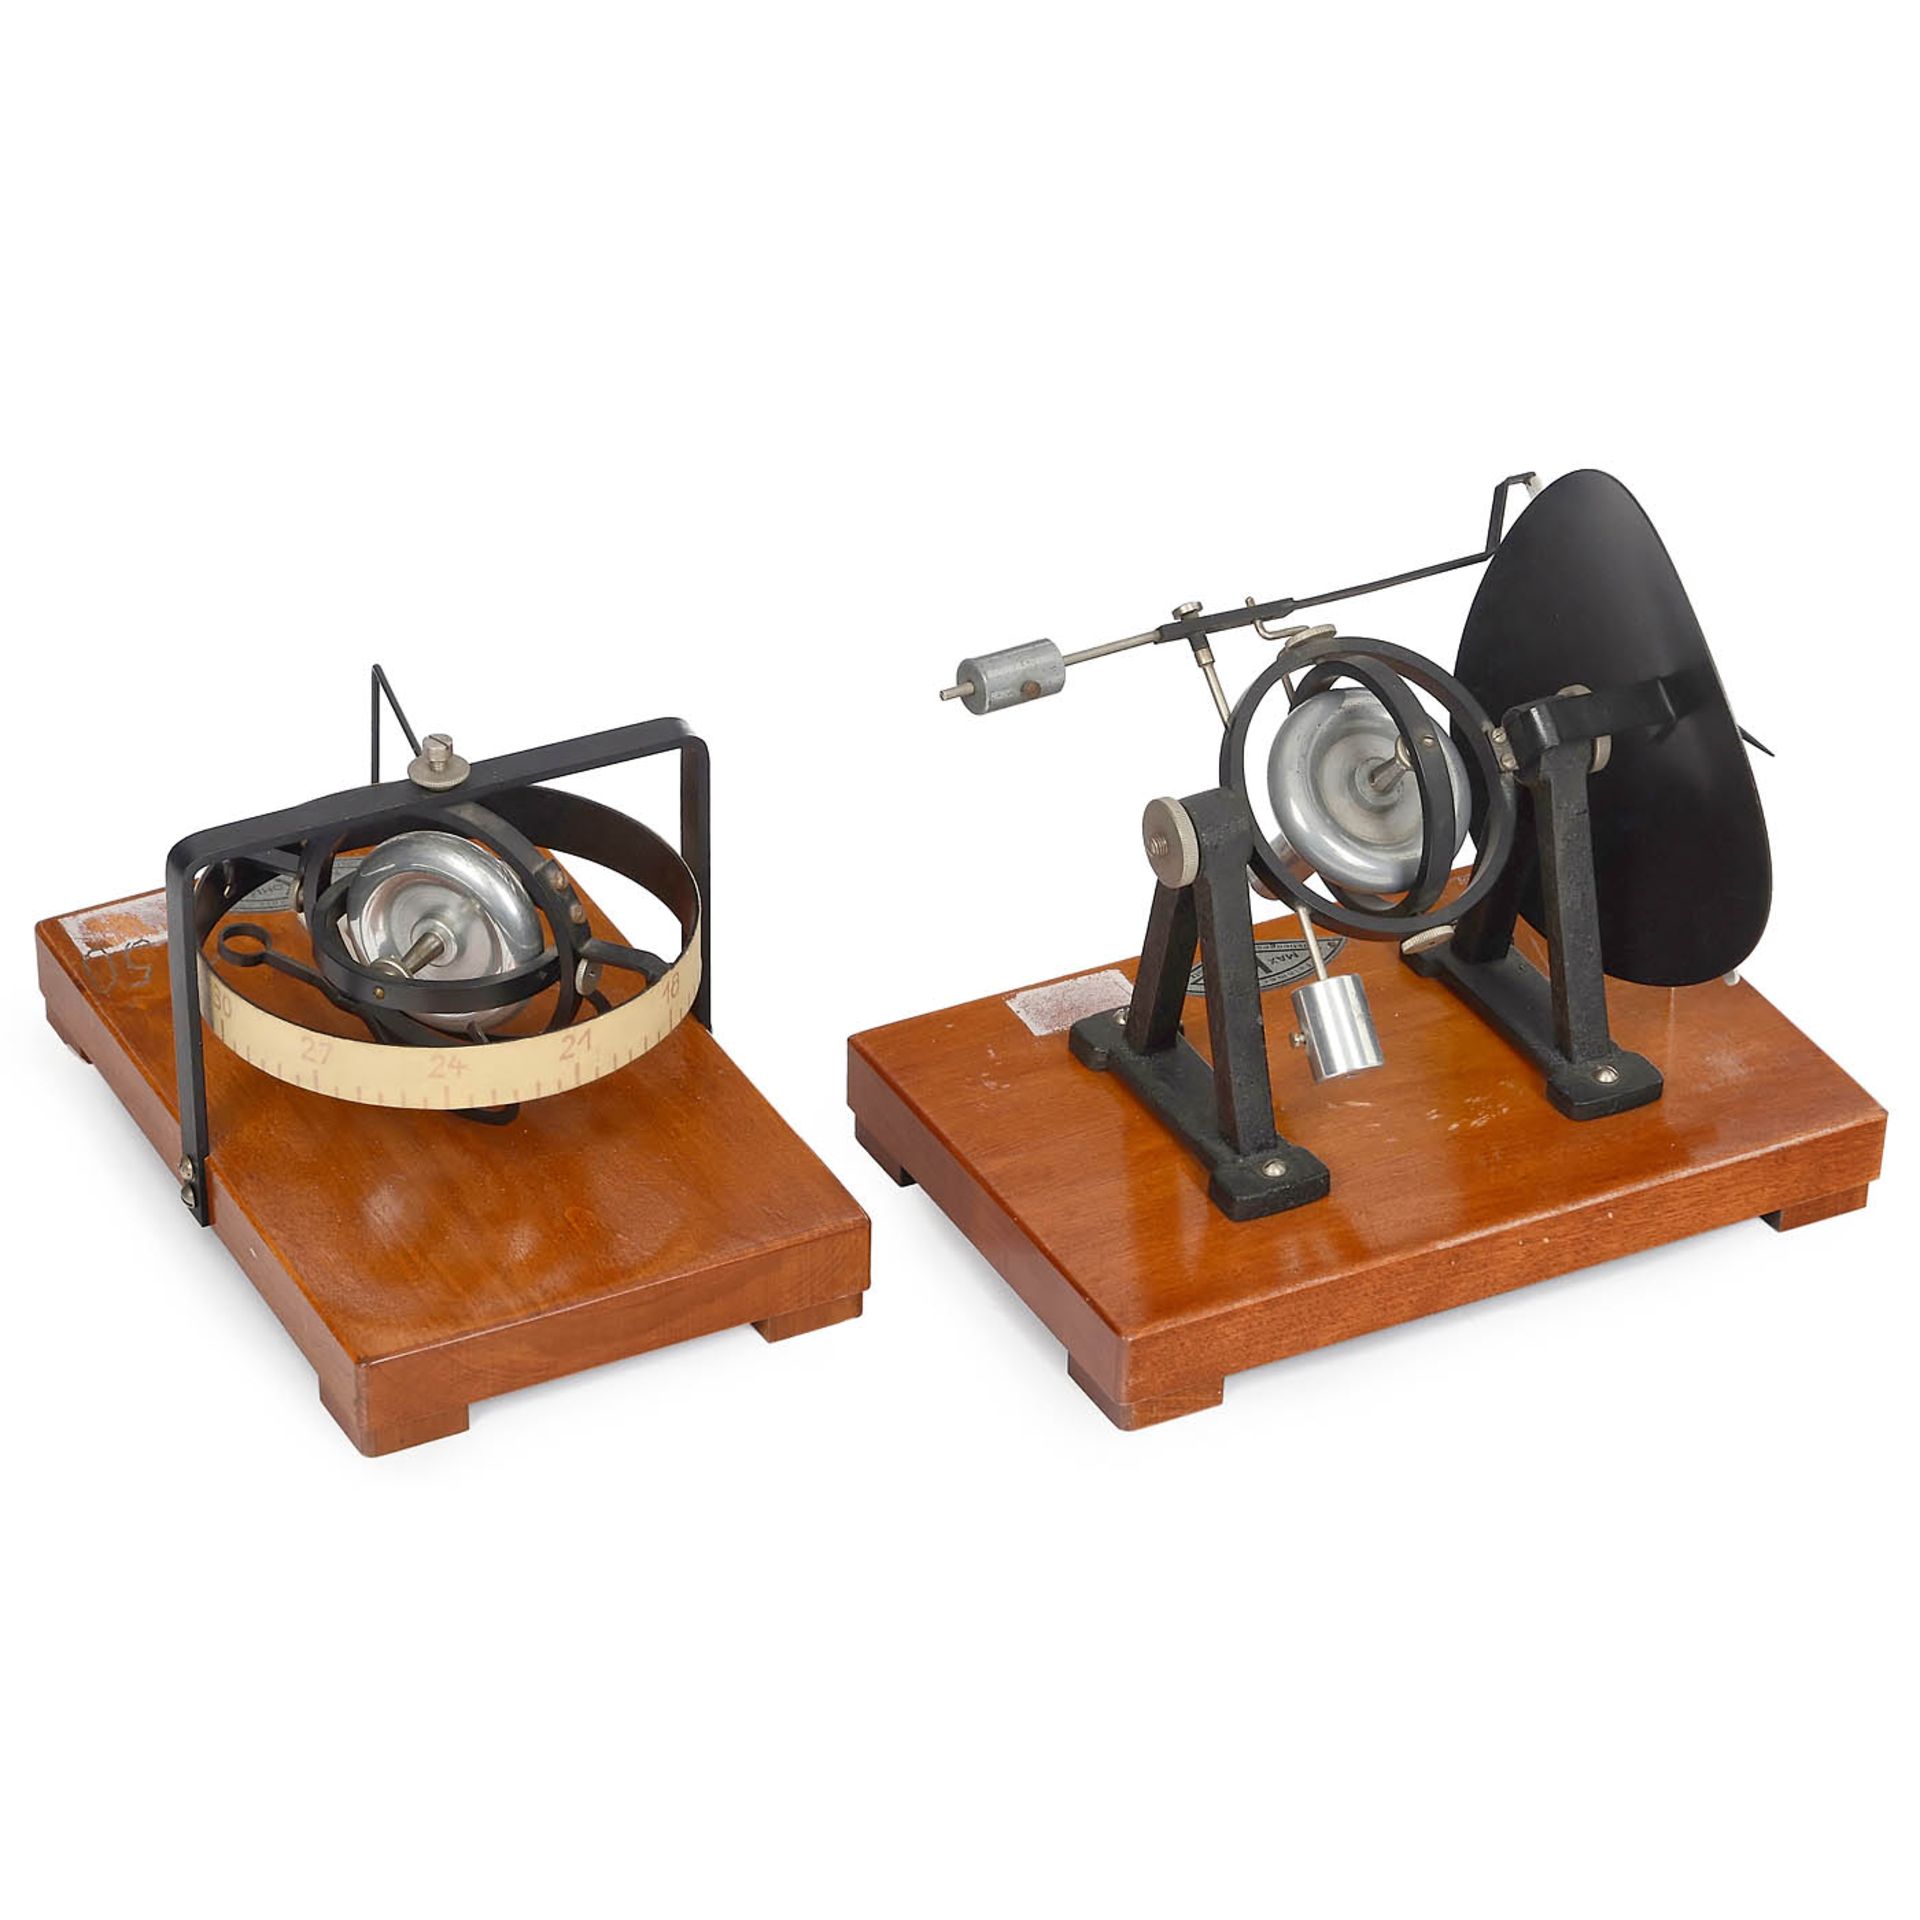 2 Gyroscopic Demonstration Apparatuses, c. 1930 - Image 2 of 2